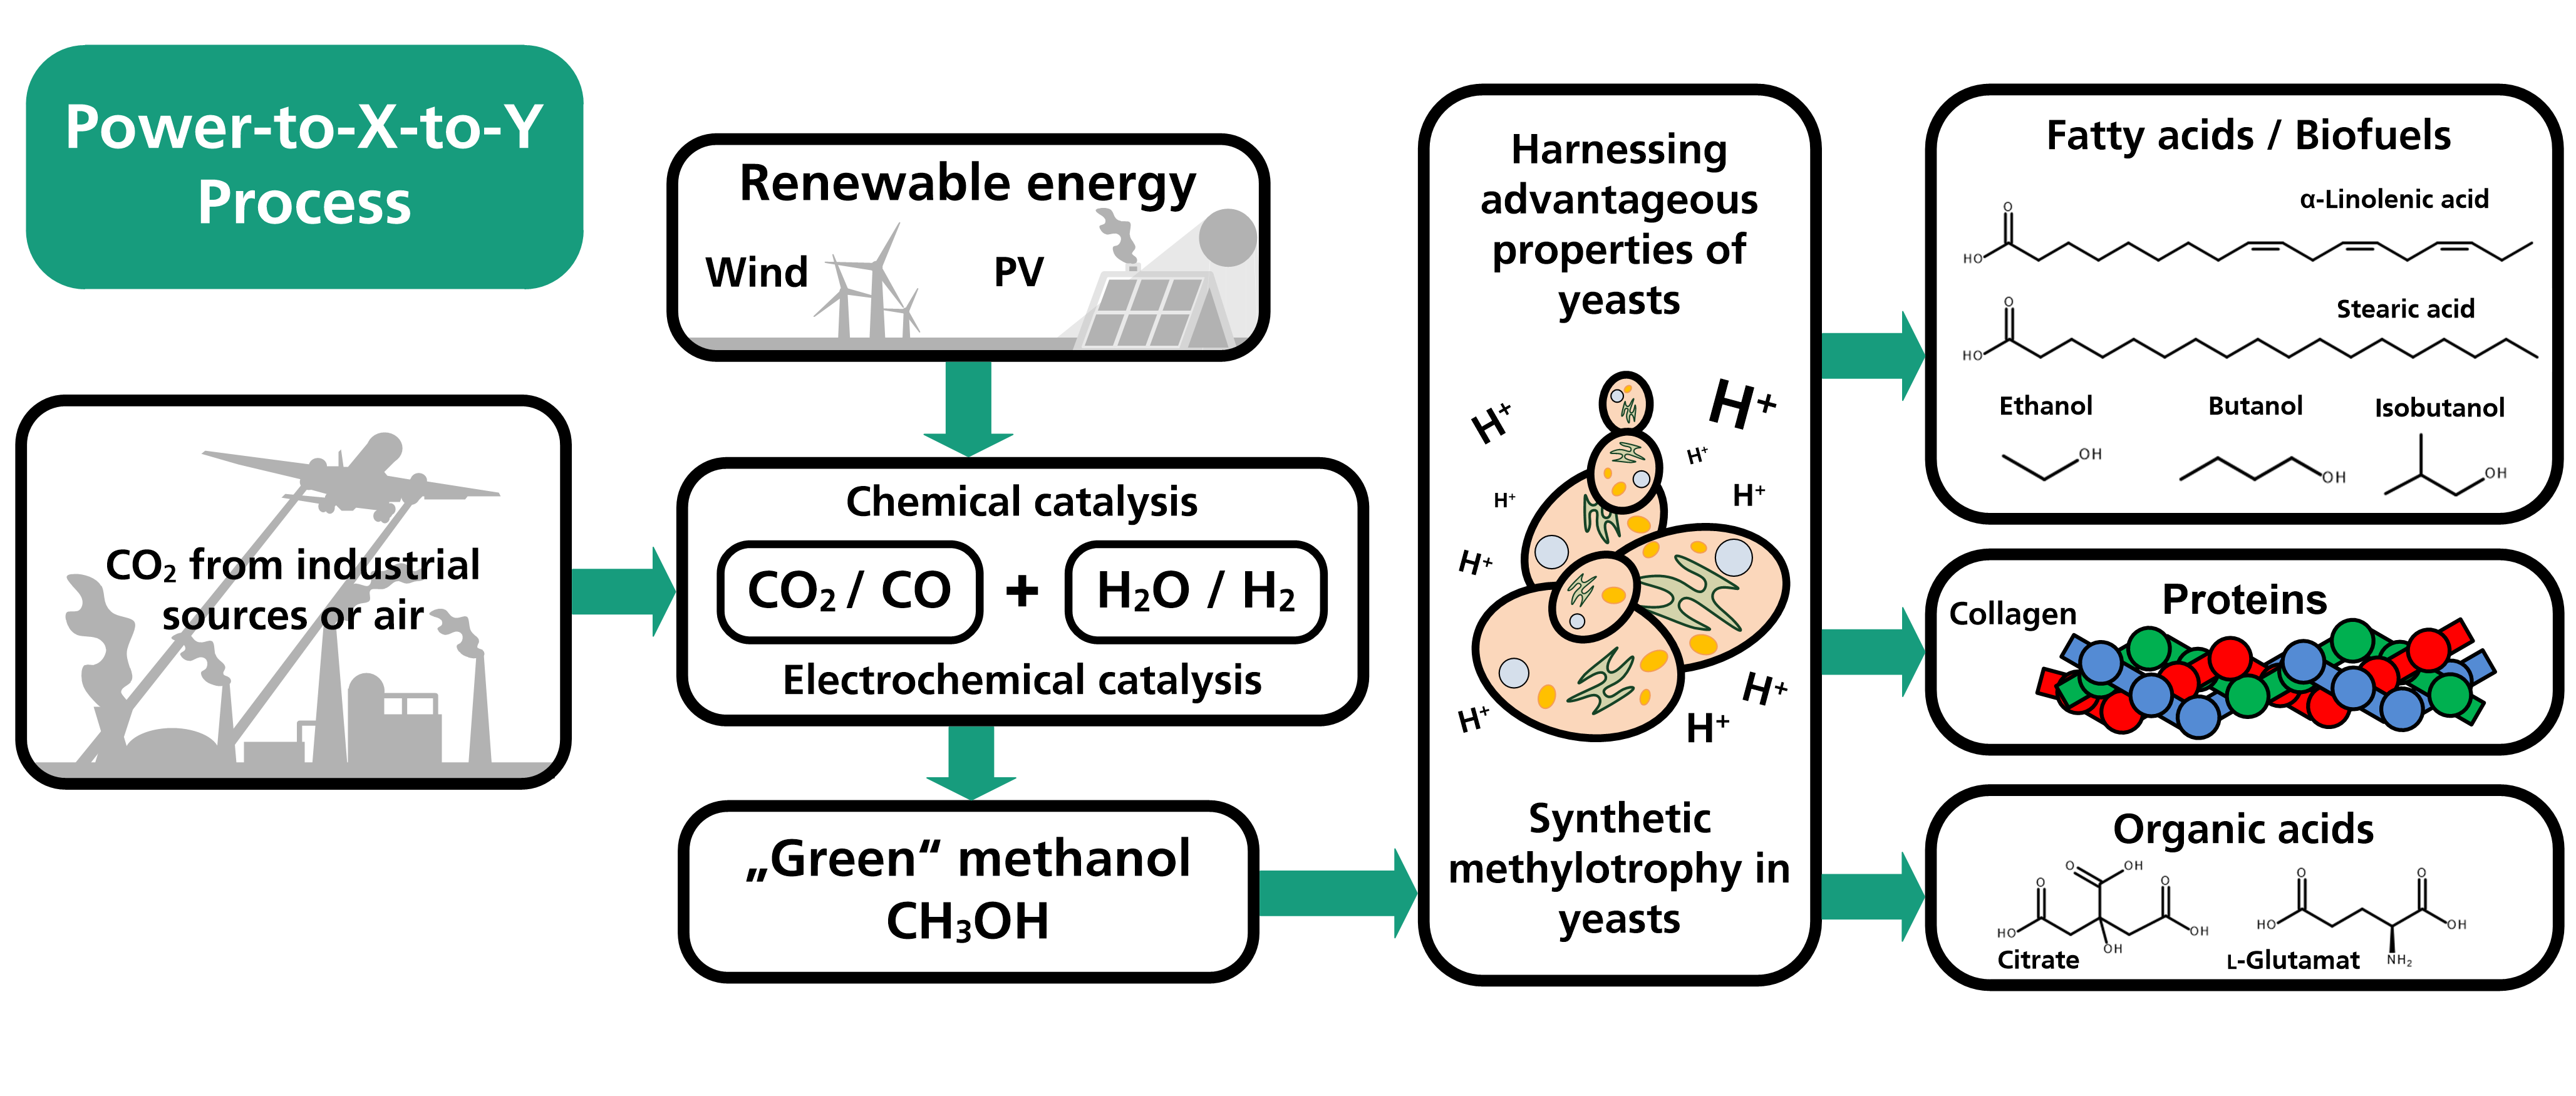 Flow diagram of a future CO<sub>2</sub> utilization cascade. Using renewable energy, Carbon Capture and Utilization (CCU) technologies, and synthetic methylotrophy in yeasts, CO<sub>2</sub> can be regarded as an almost infinitely available raw material. CO<sub>2</sub> can be used to produce high-value chemicals with a broad marketing and application potential. 